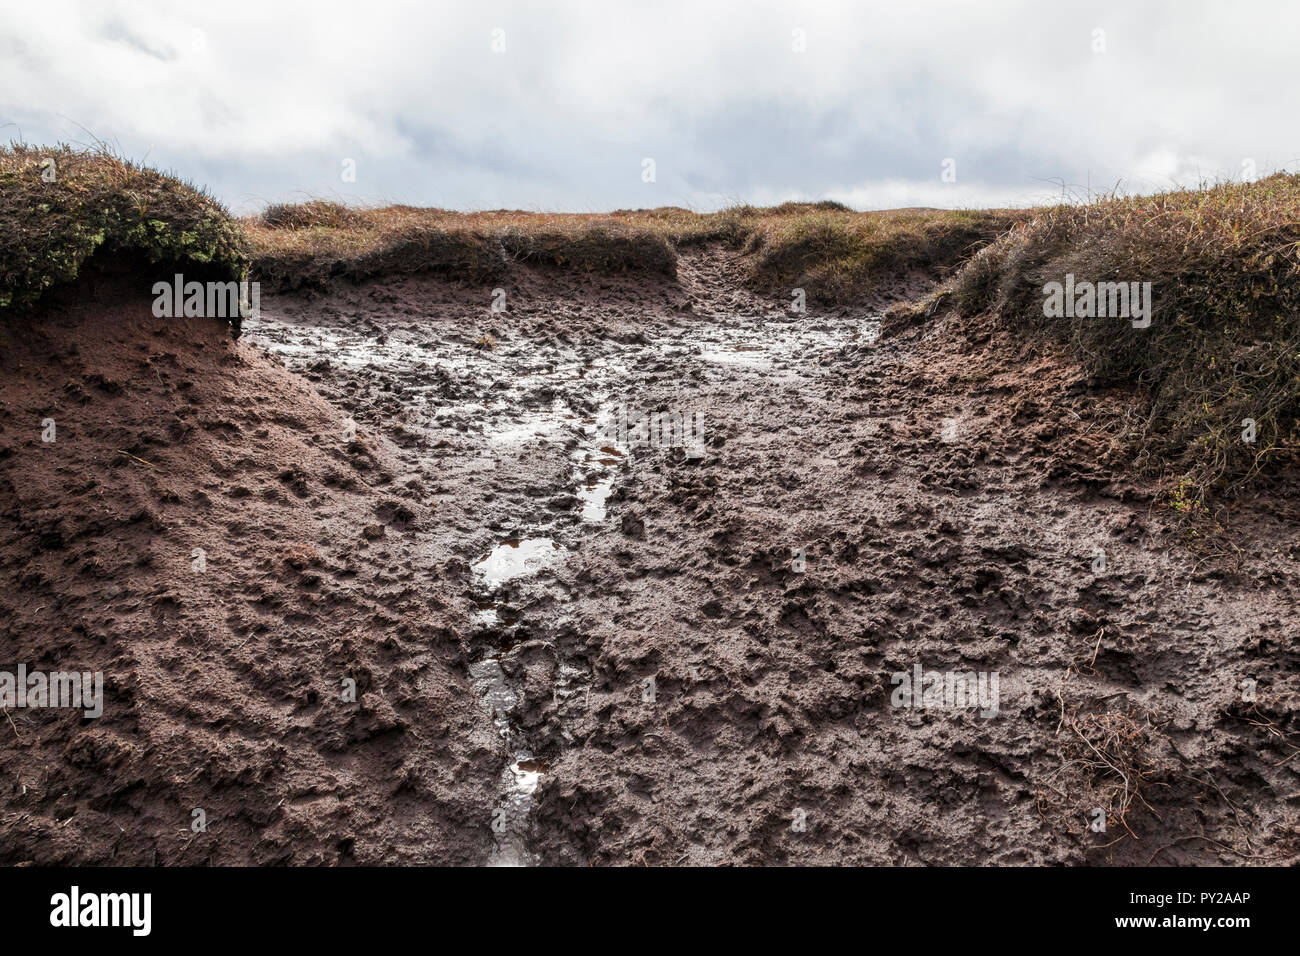 Close up of muddy land. Mud on a boggy peat moor due to moorland erosion. Kinder Scout, Derbyshire, Peak District National Park, England, UK Stock Photo